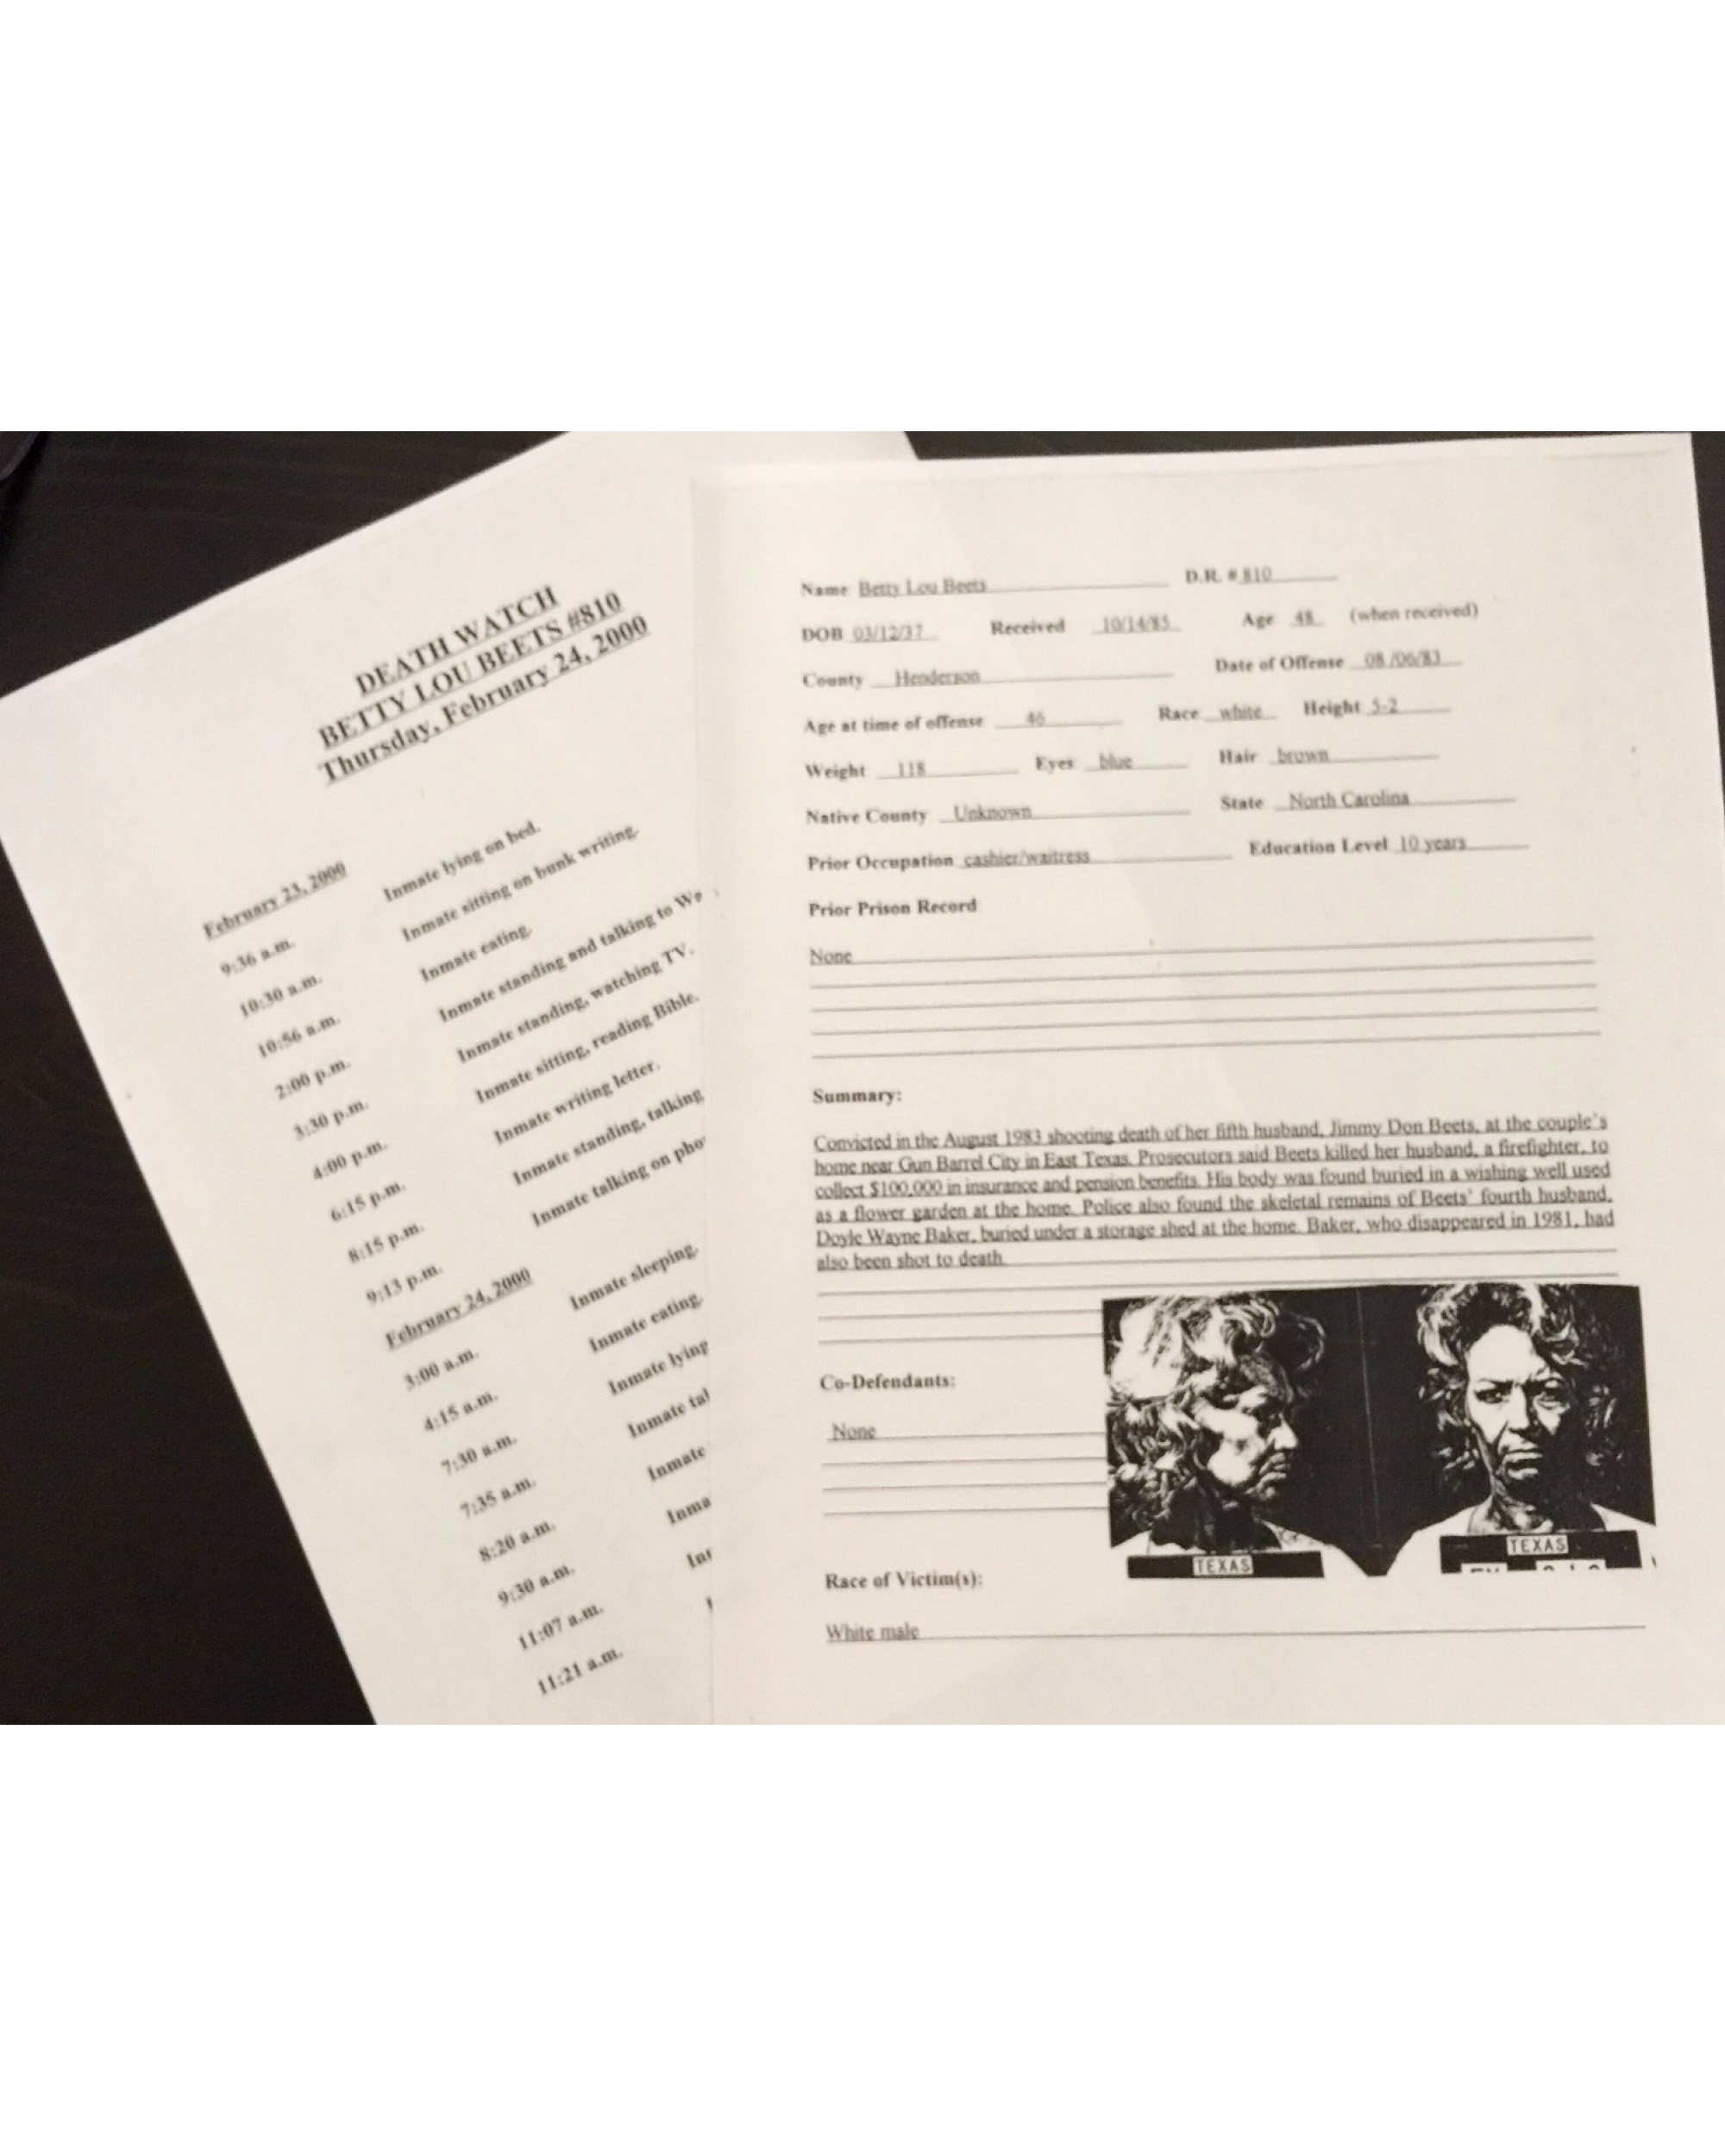 A case file and death watch log for Betty Lou Beets, the first woman Michelle saw executed.